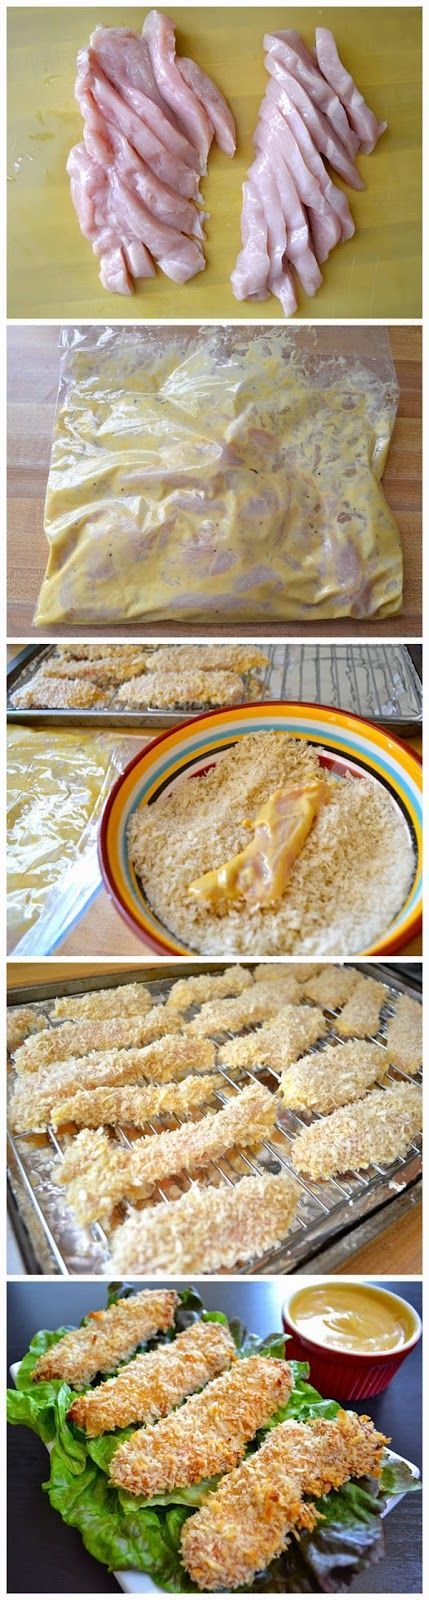 honey mustard chicken strips- made this for dinner tonight, my kids loved it! My 5 year old told me it was his new fave